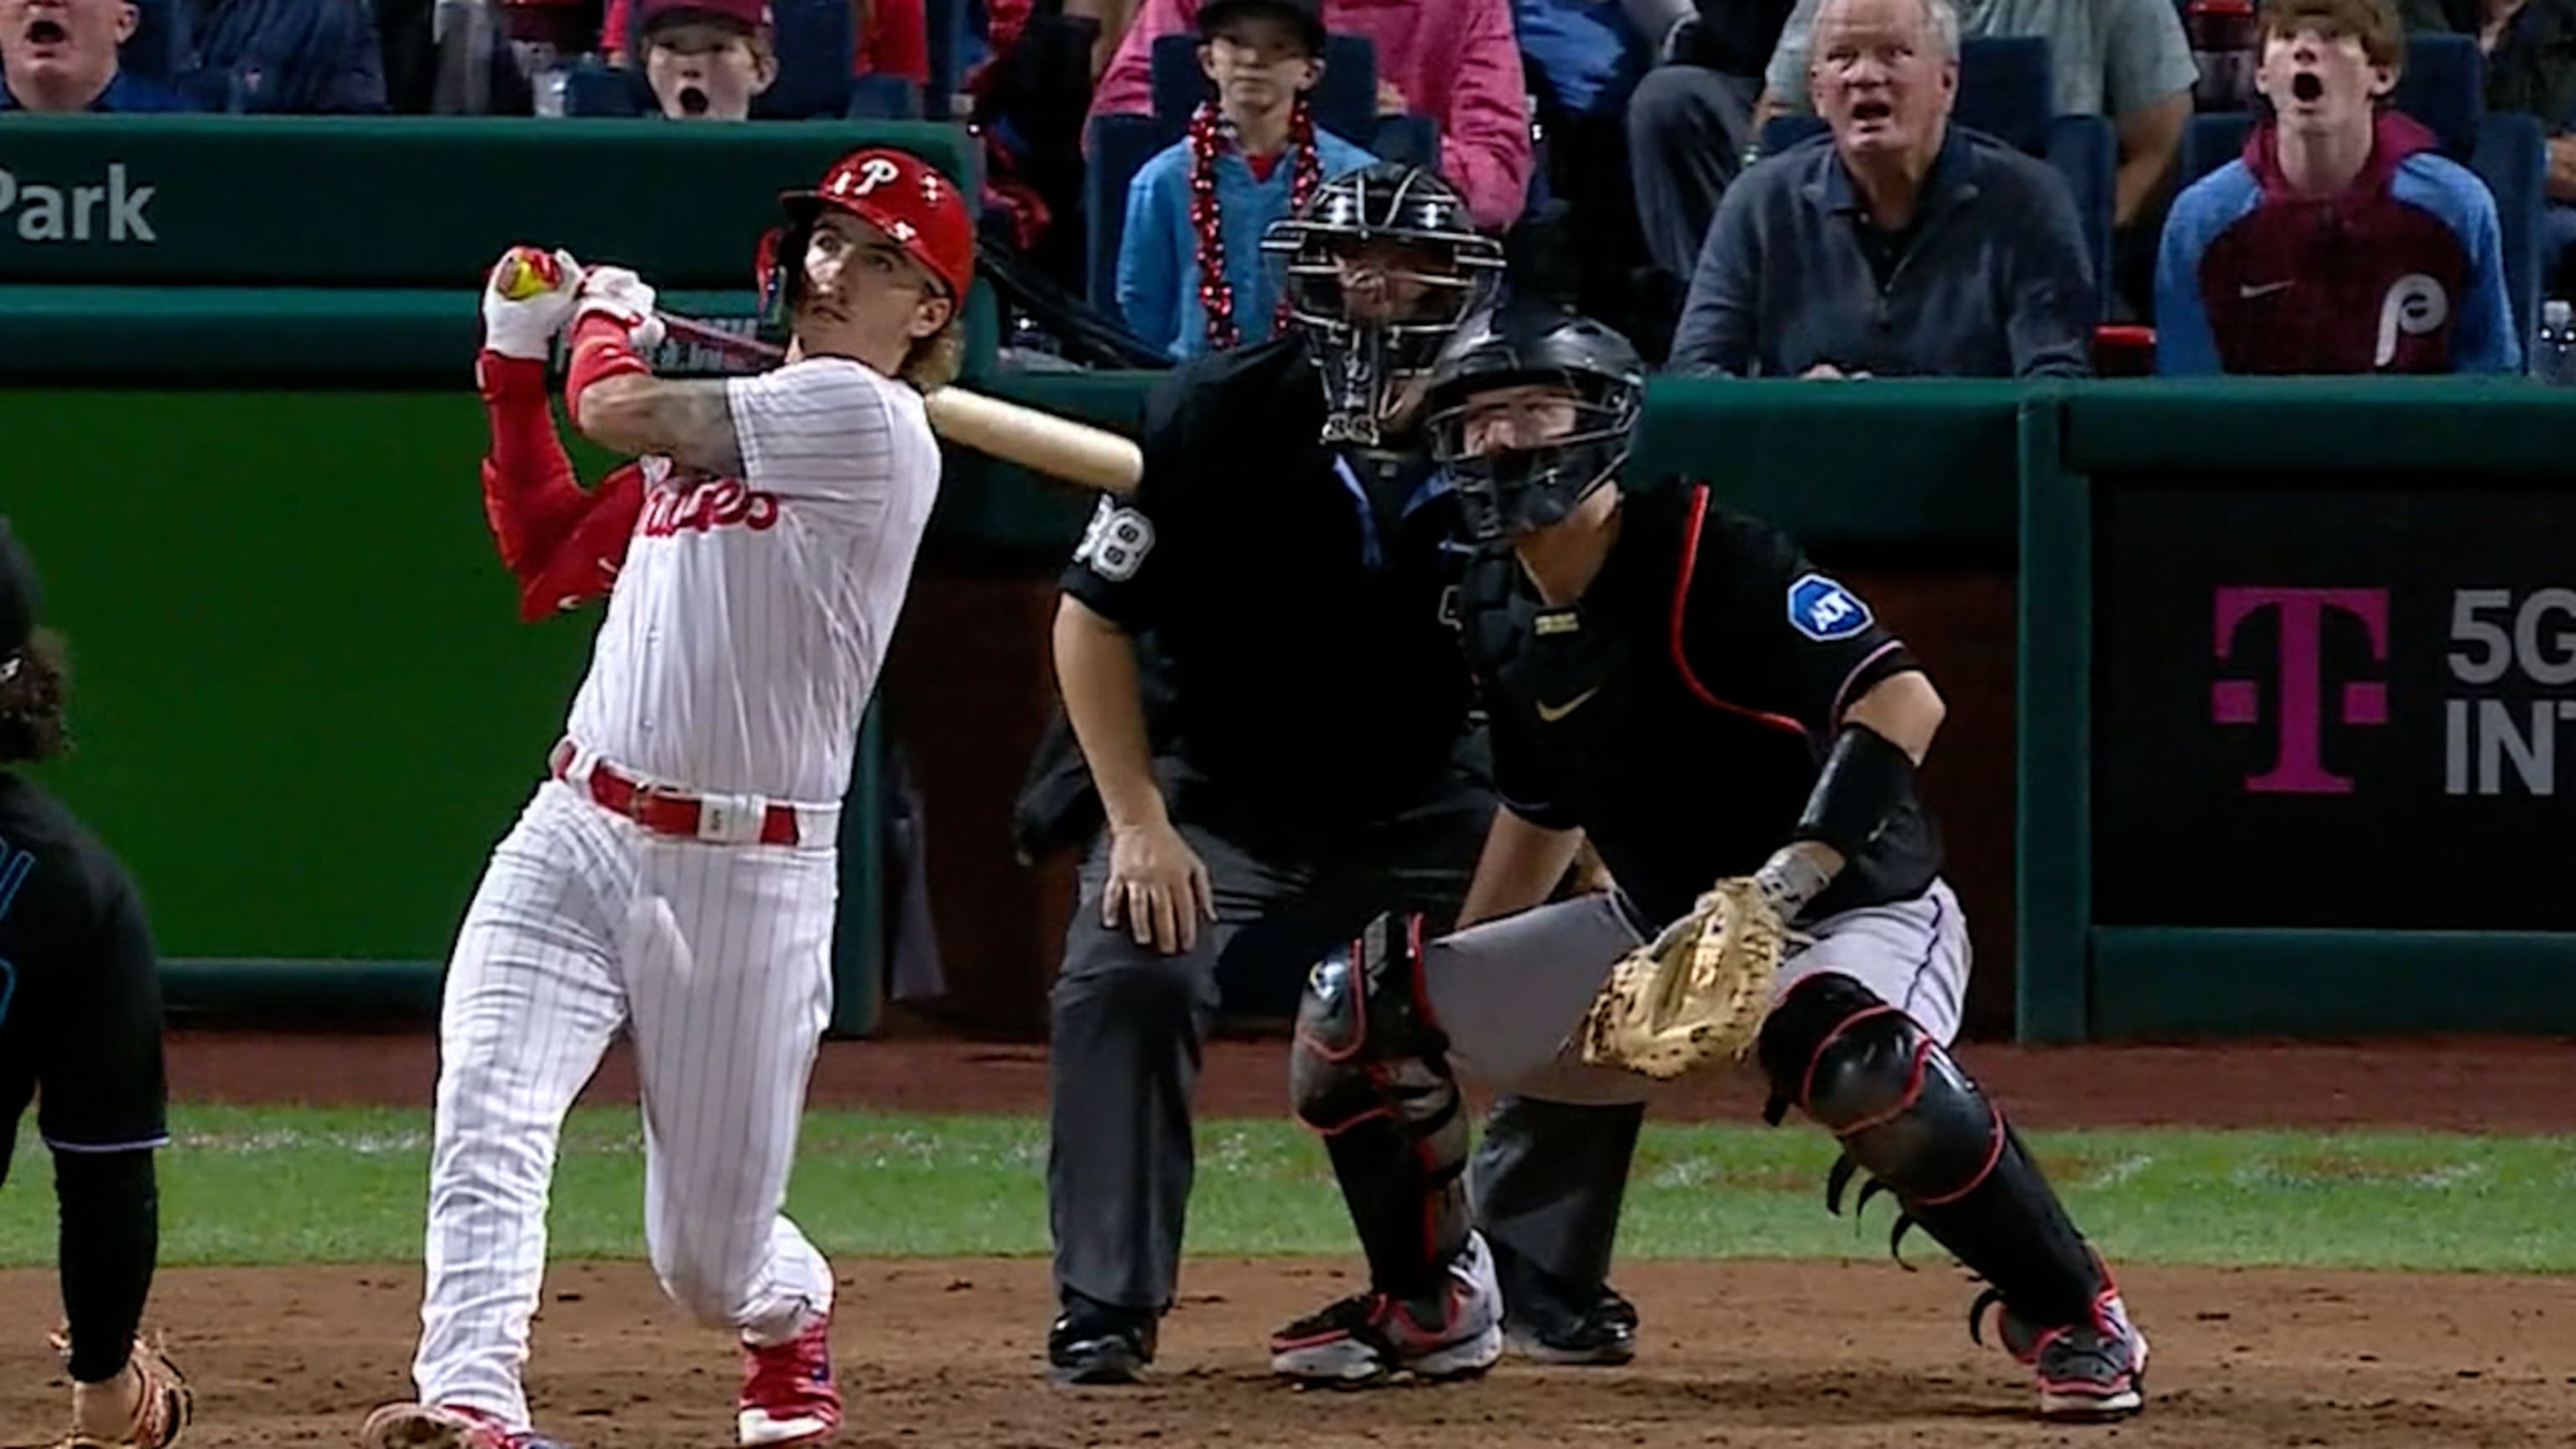 GIF: Shane Victorino hits 2 homers, drives in 7 - Over the Monster